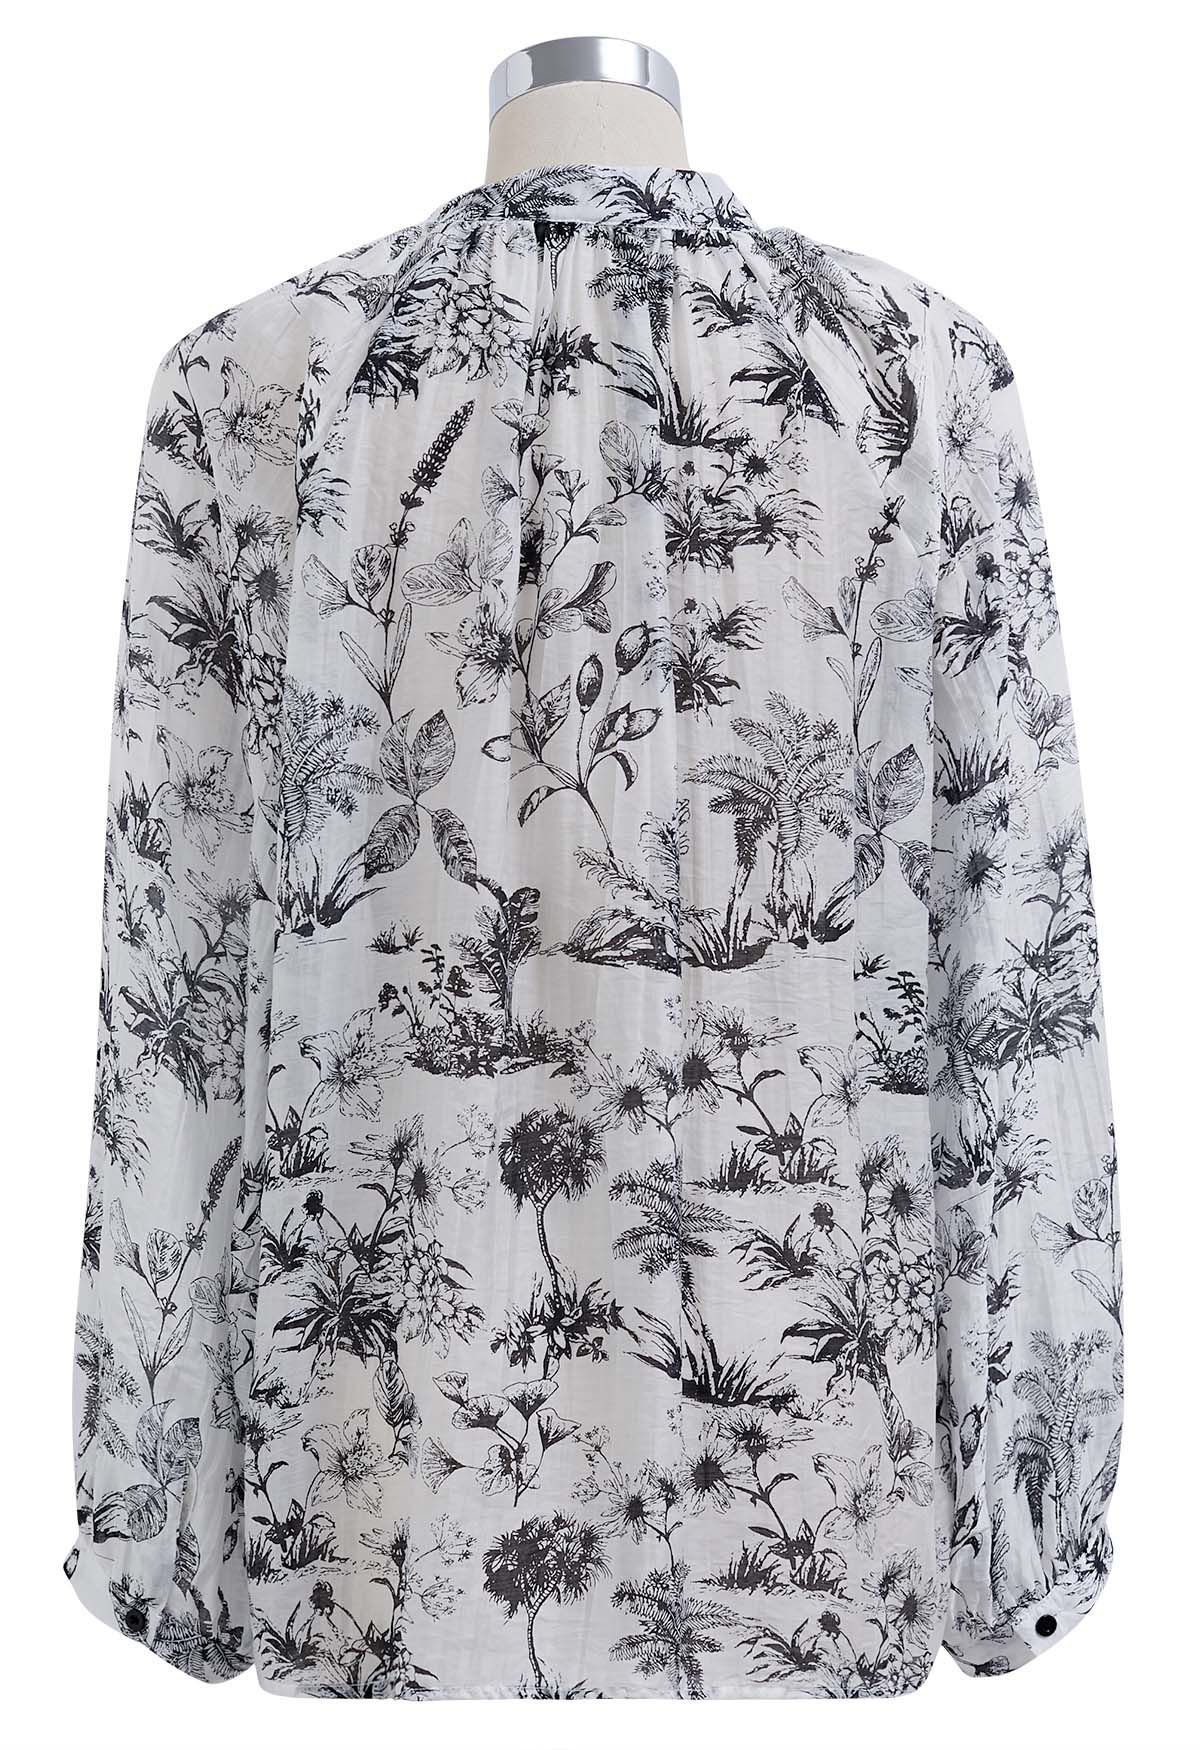 Tropical Landscape Buttoned Shirt in White